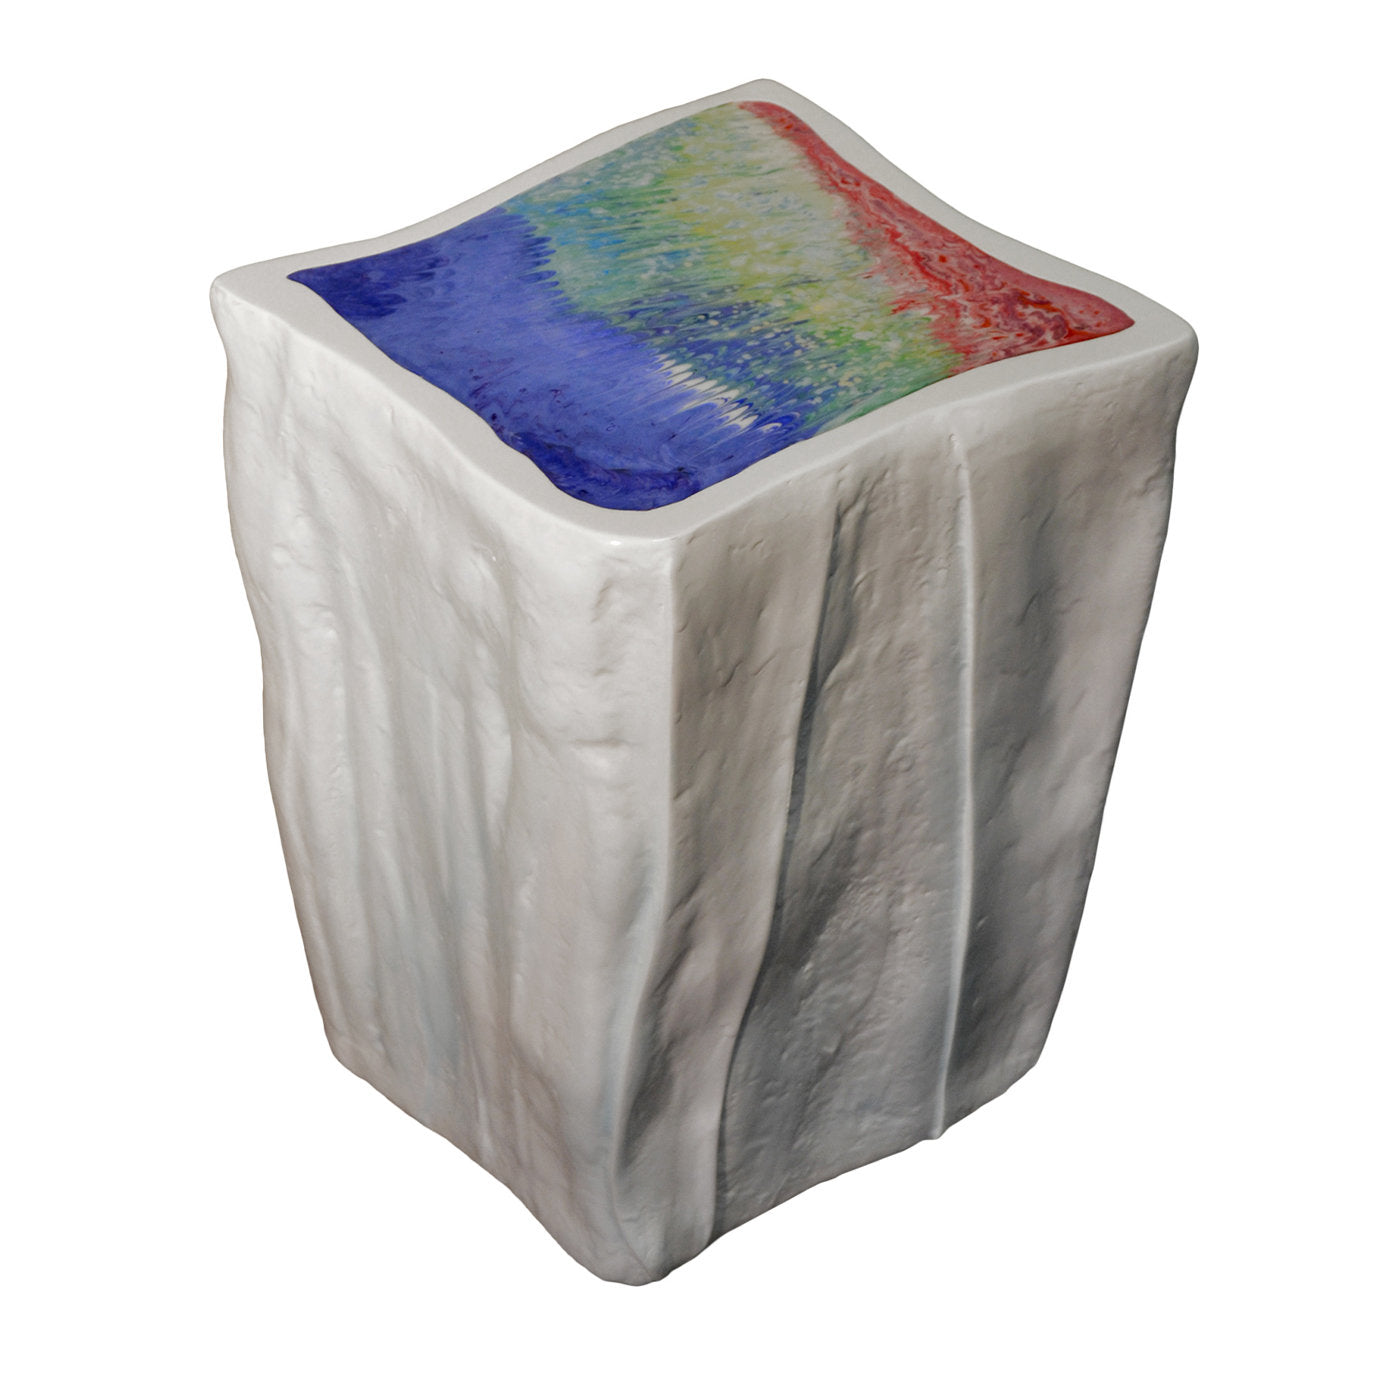 Glacial Sculpture Ice Side Table Limited Edition - Alternative view 3